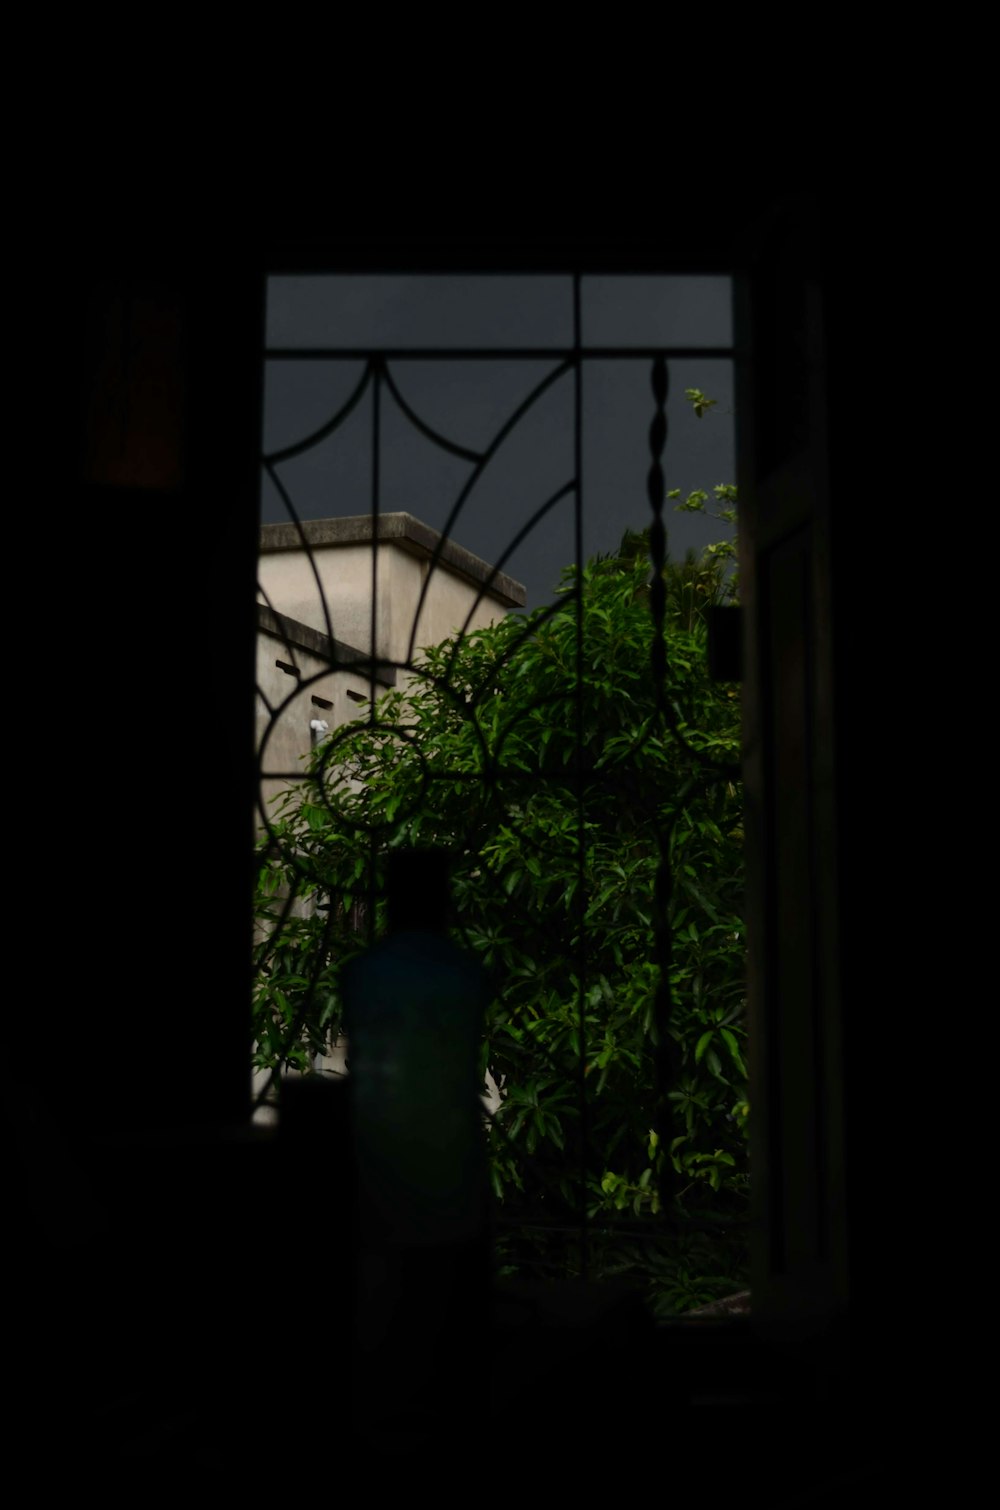 a view of a house through a window at night